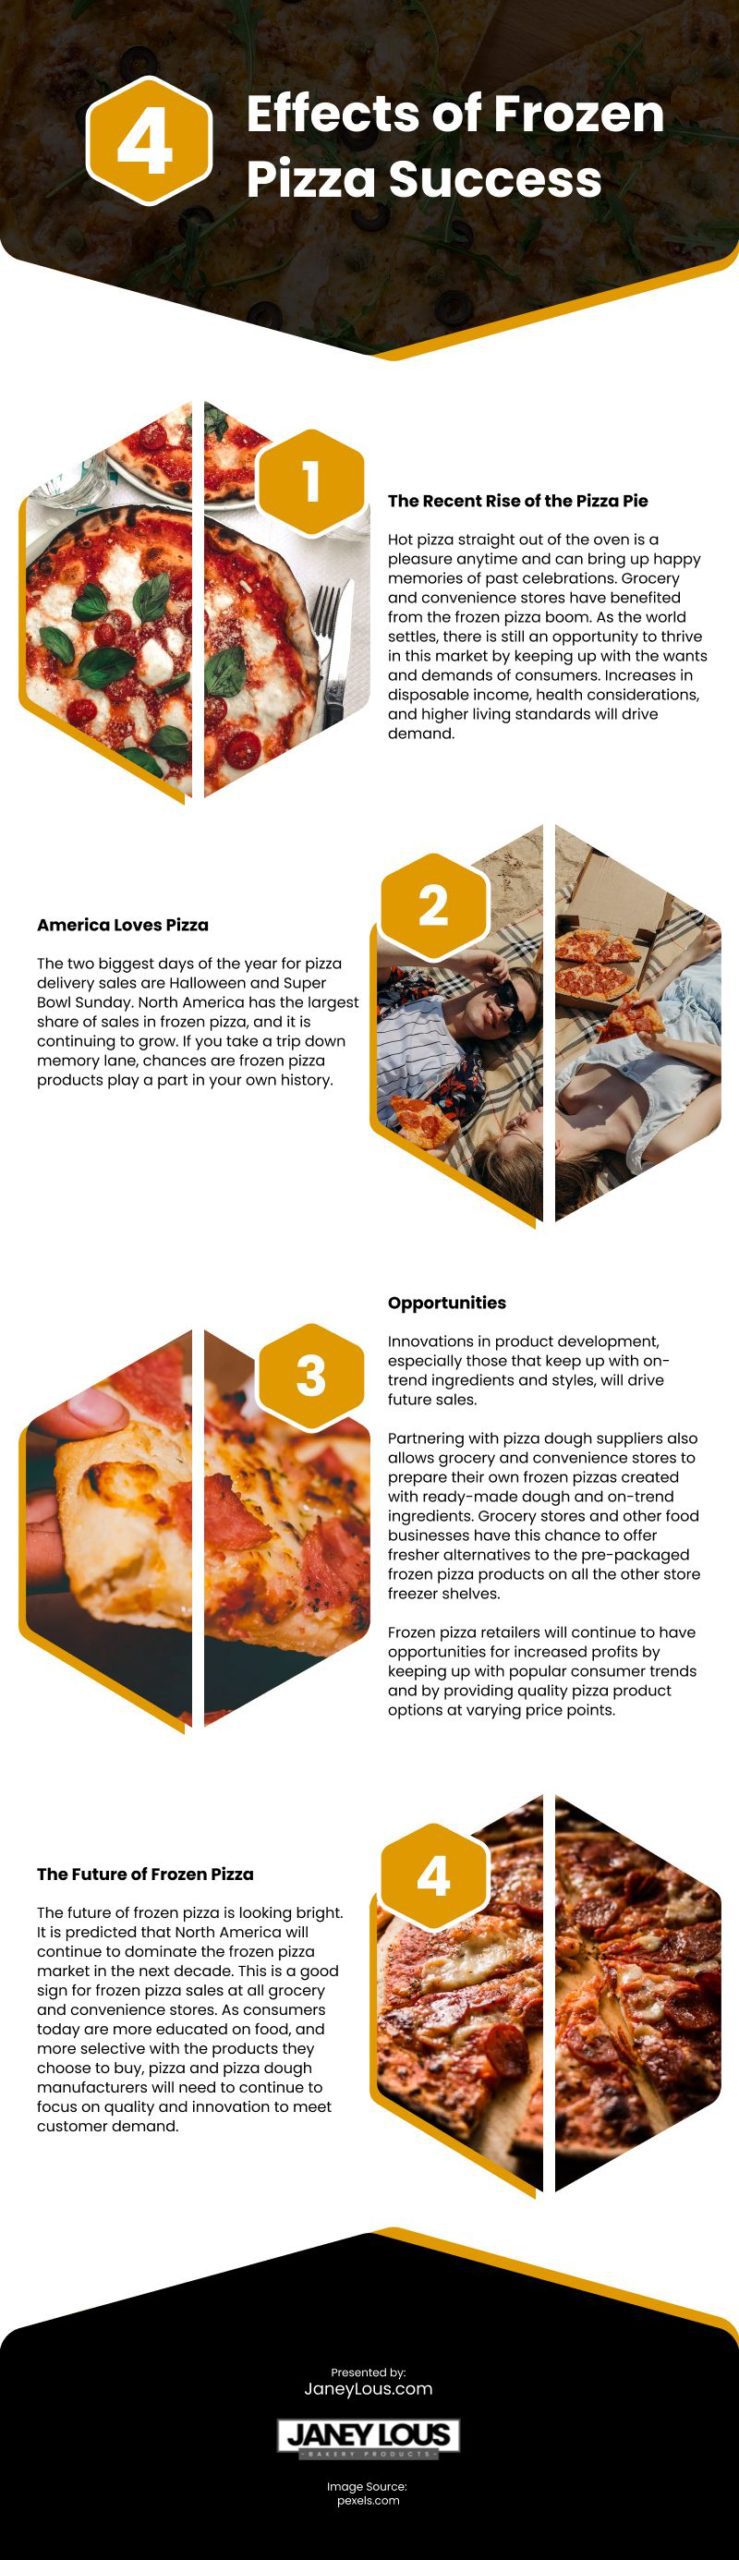 How Frozen Pizza Success Affects Grocery and Convenience Stores